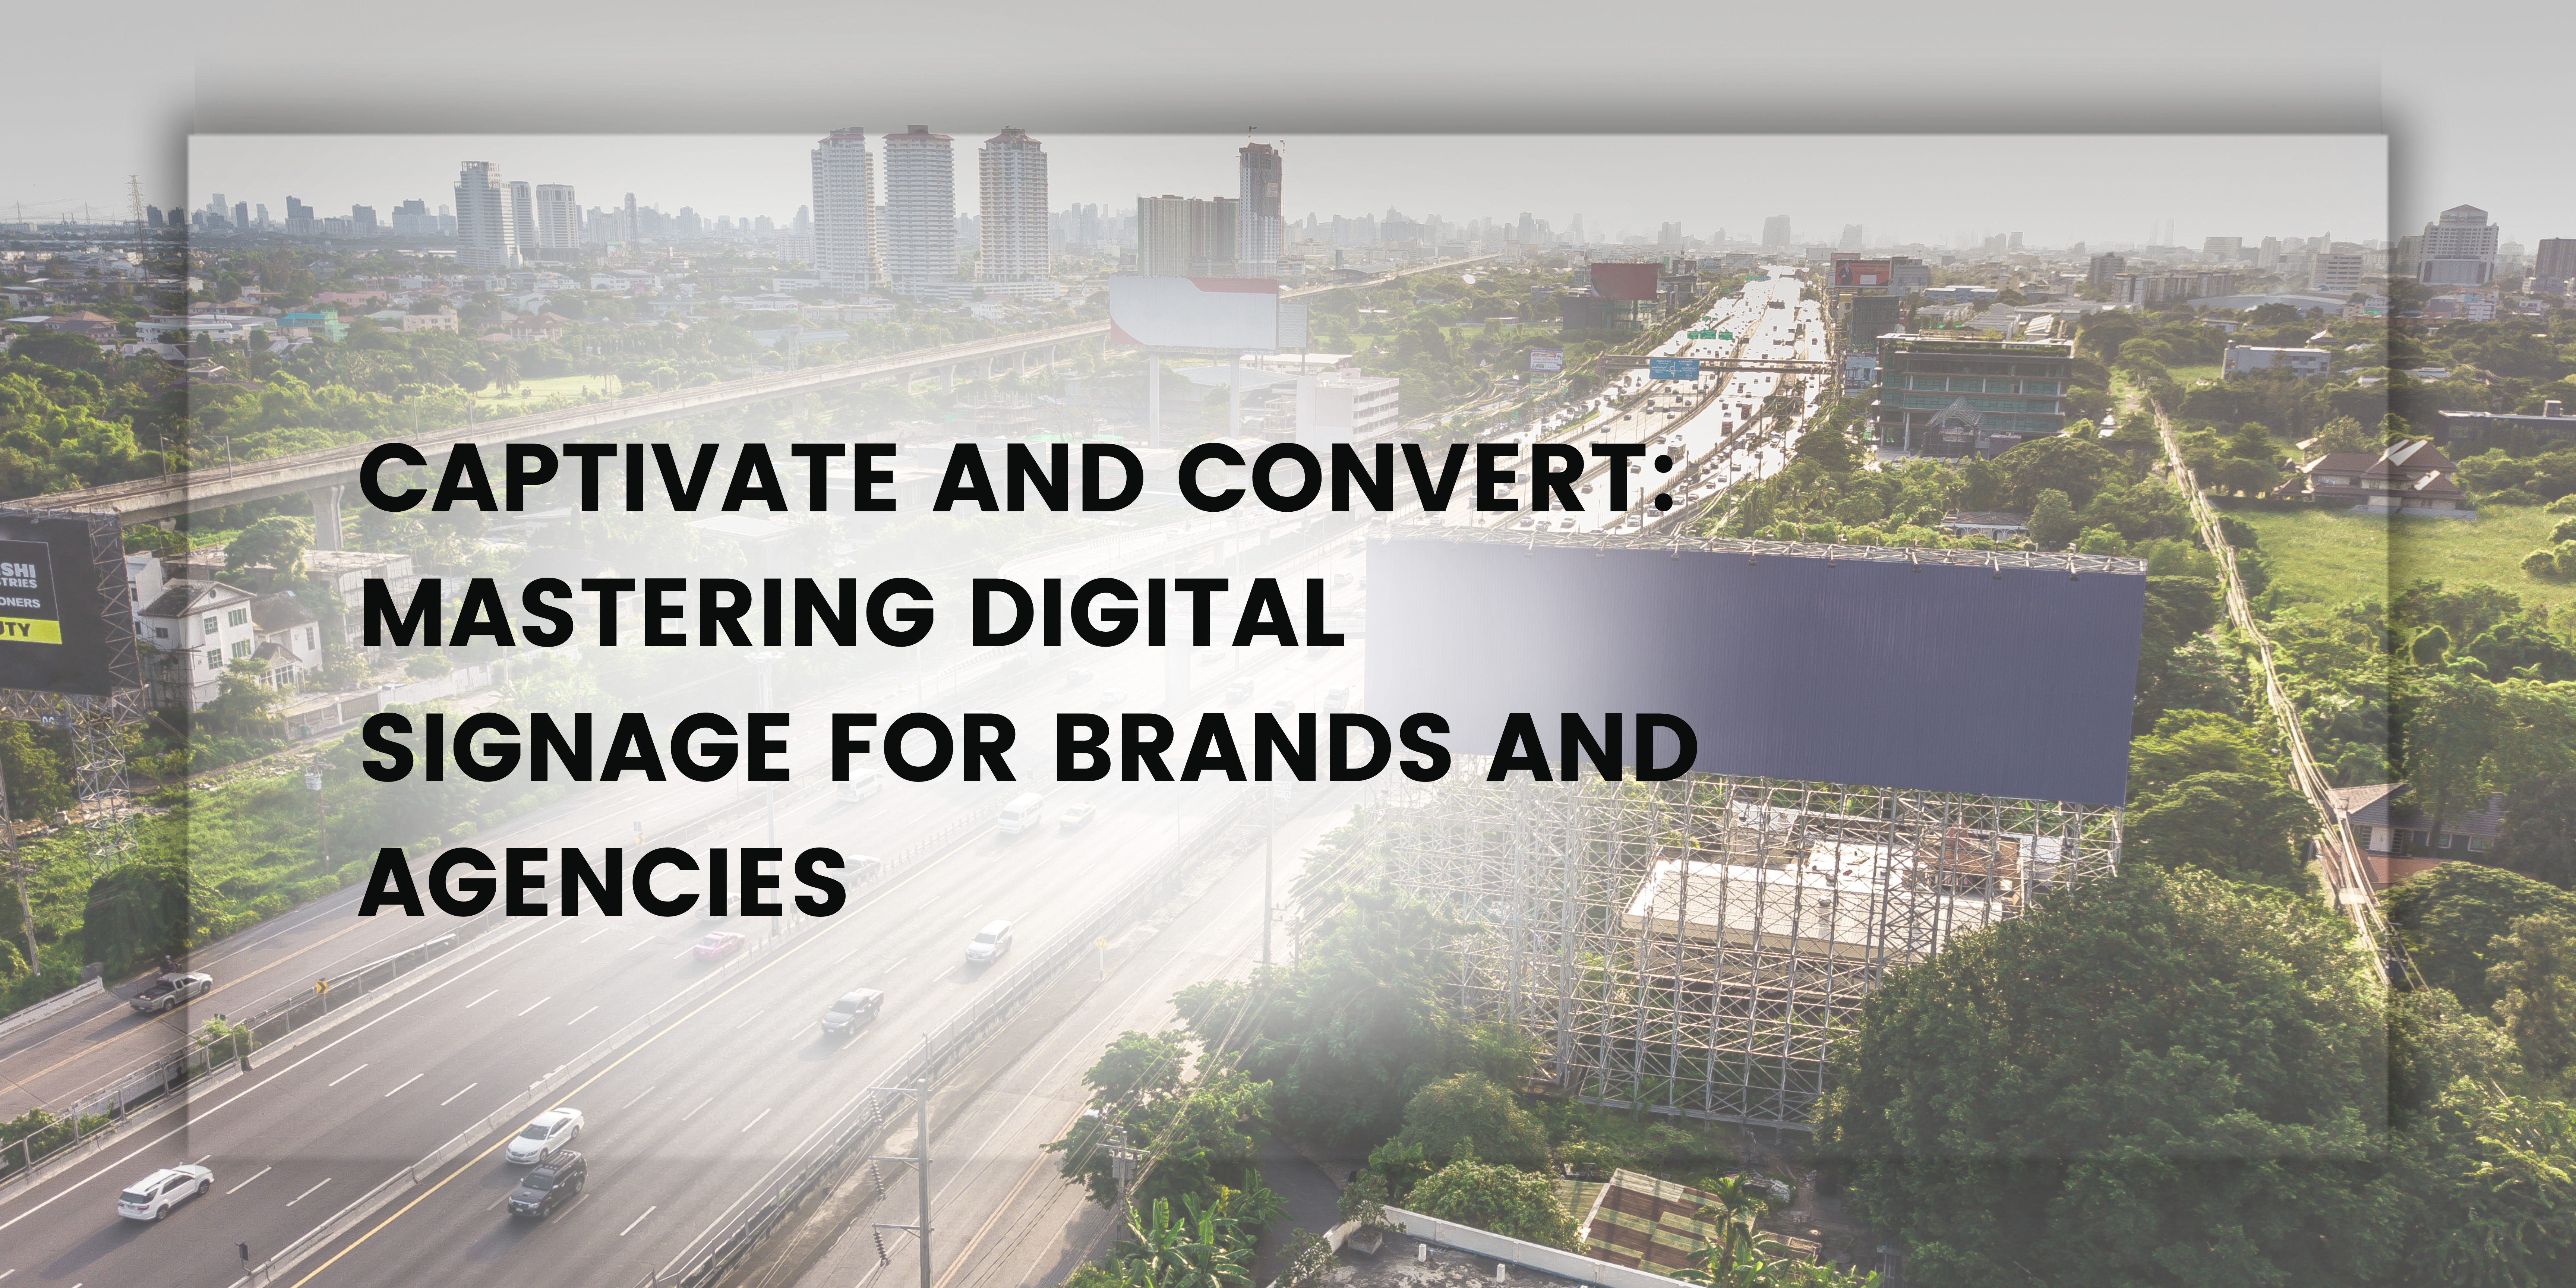 Captivate and Convert: Mastering Digital Signage for Brands and Agencies